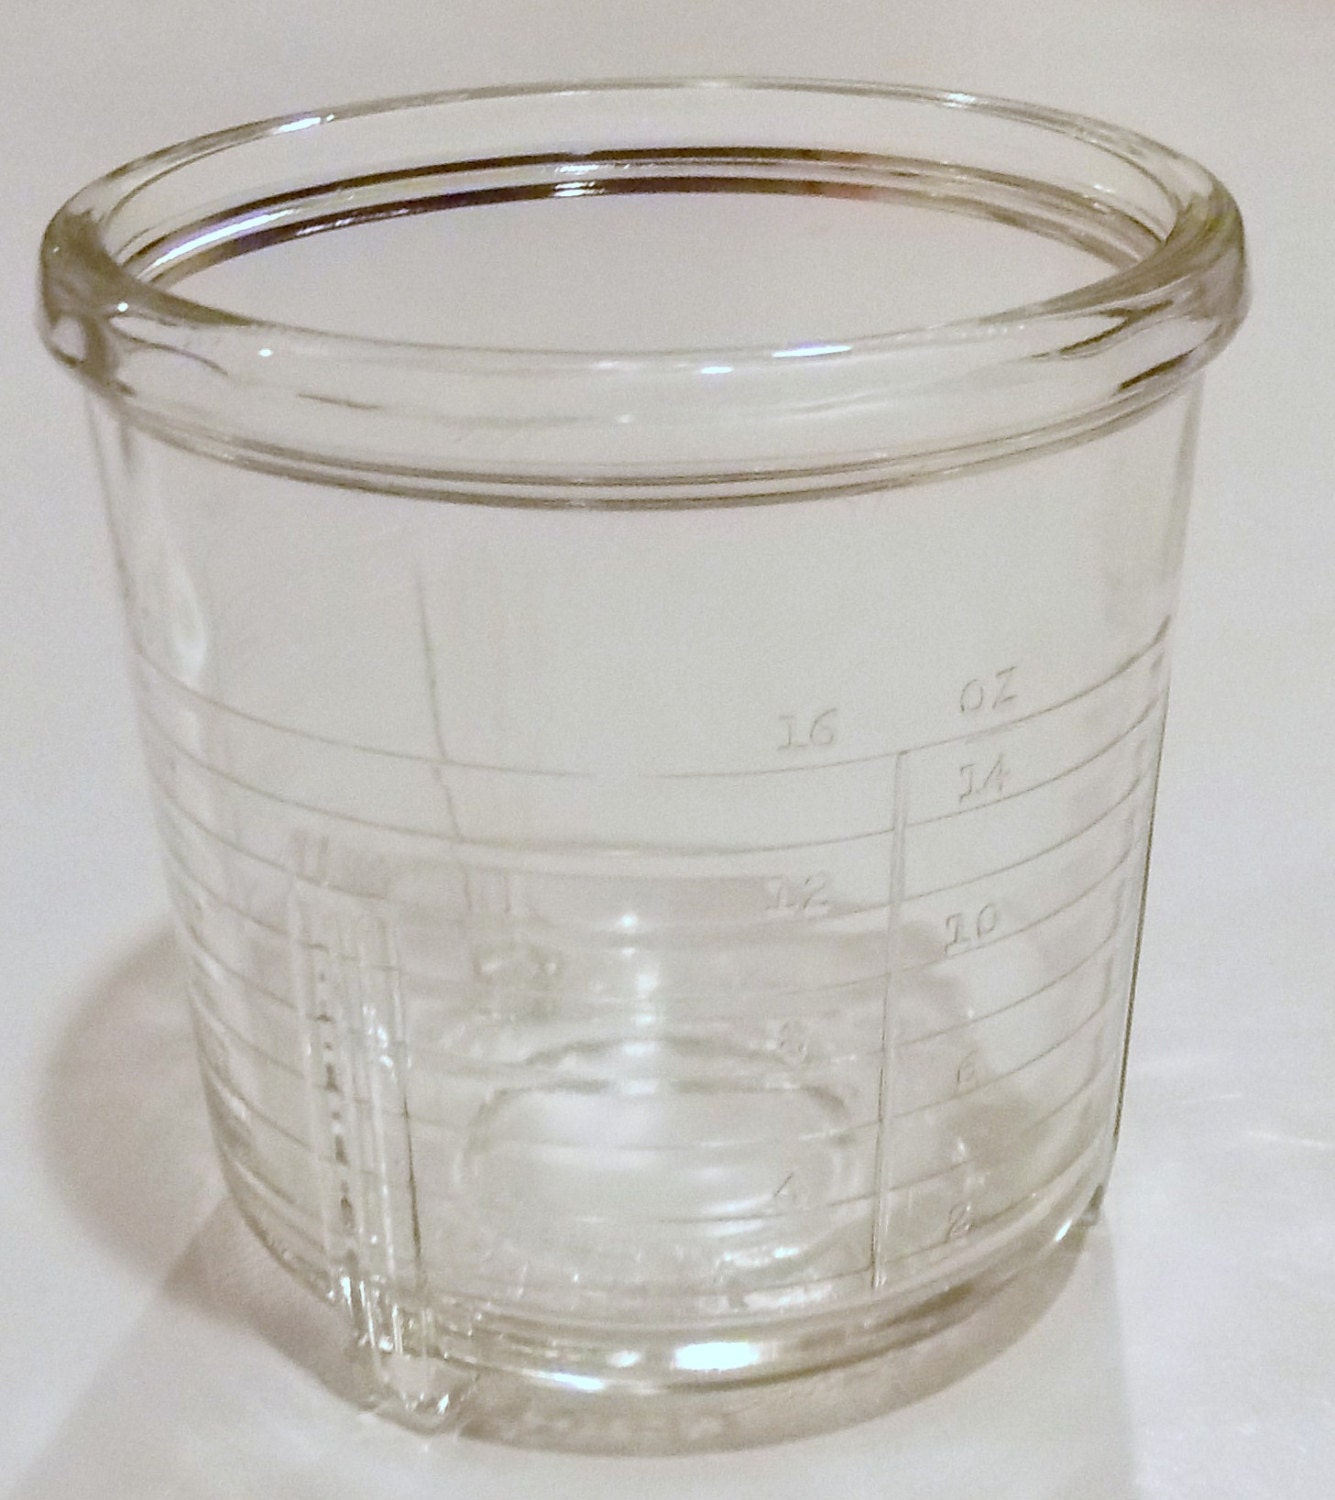 Cup  Pint cup Chicago Measuring measuring Glass Products Cup 1 2 Corp. Vidrio Vintage  vintage glass